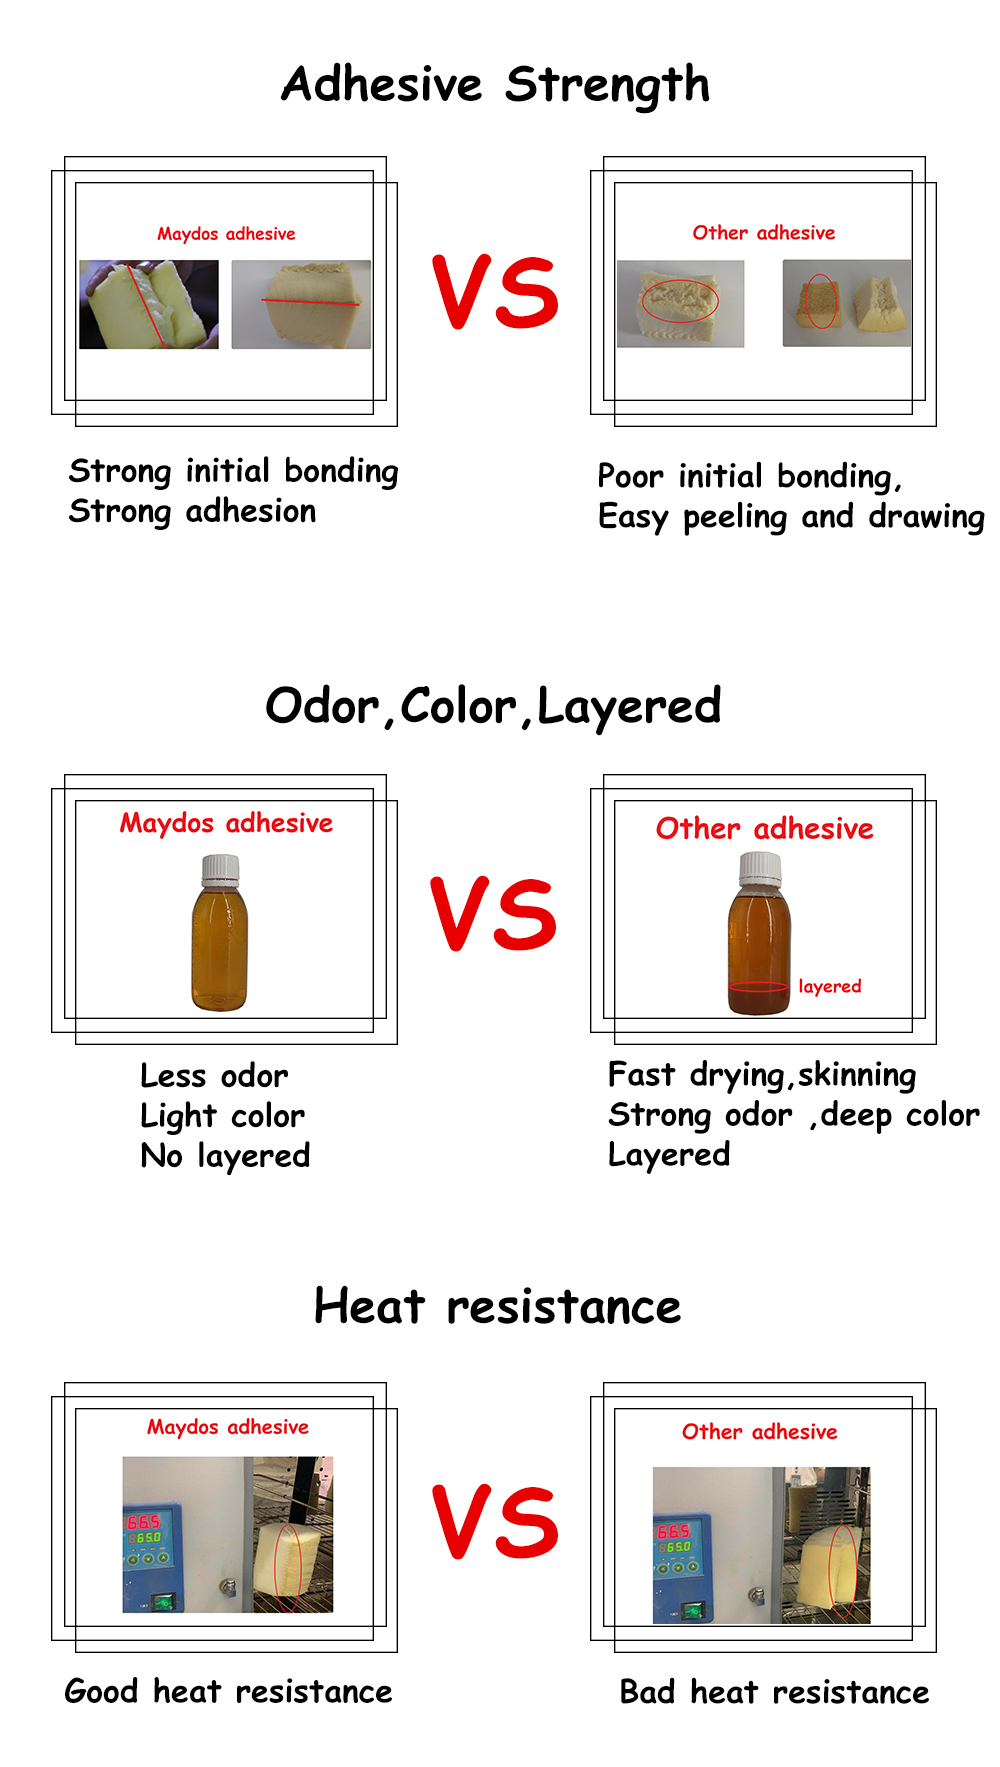 Adhesive Strength Less odor light color no layered Heat resistance